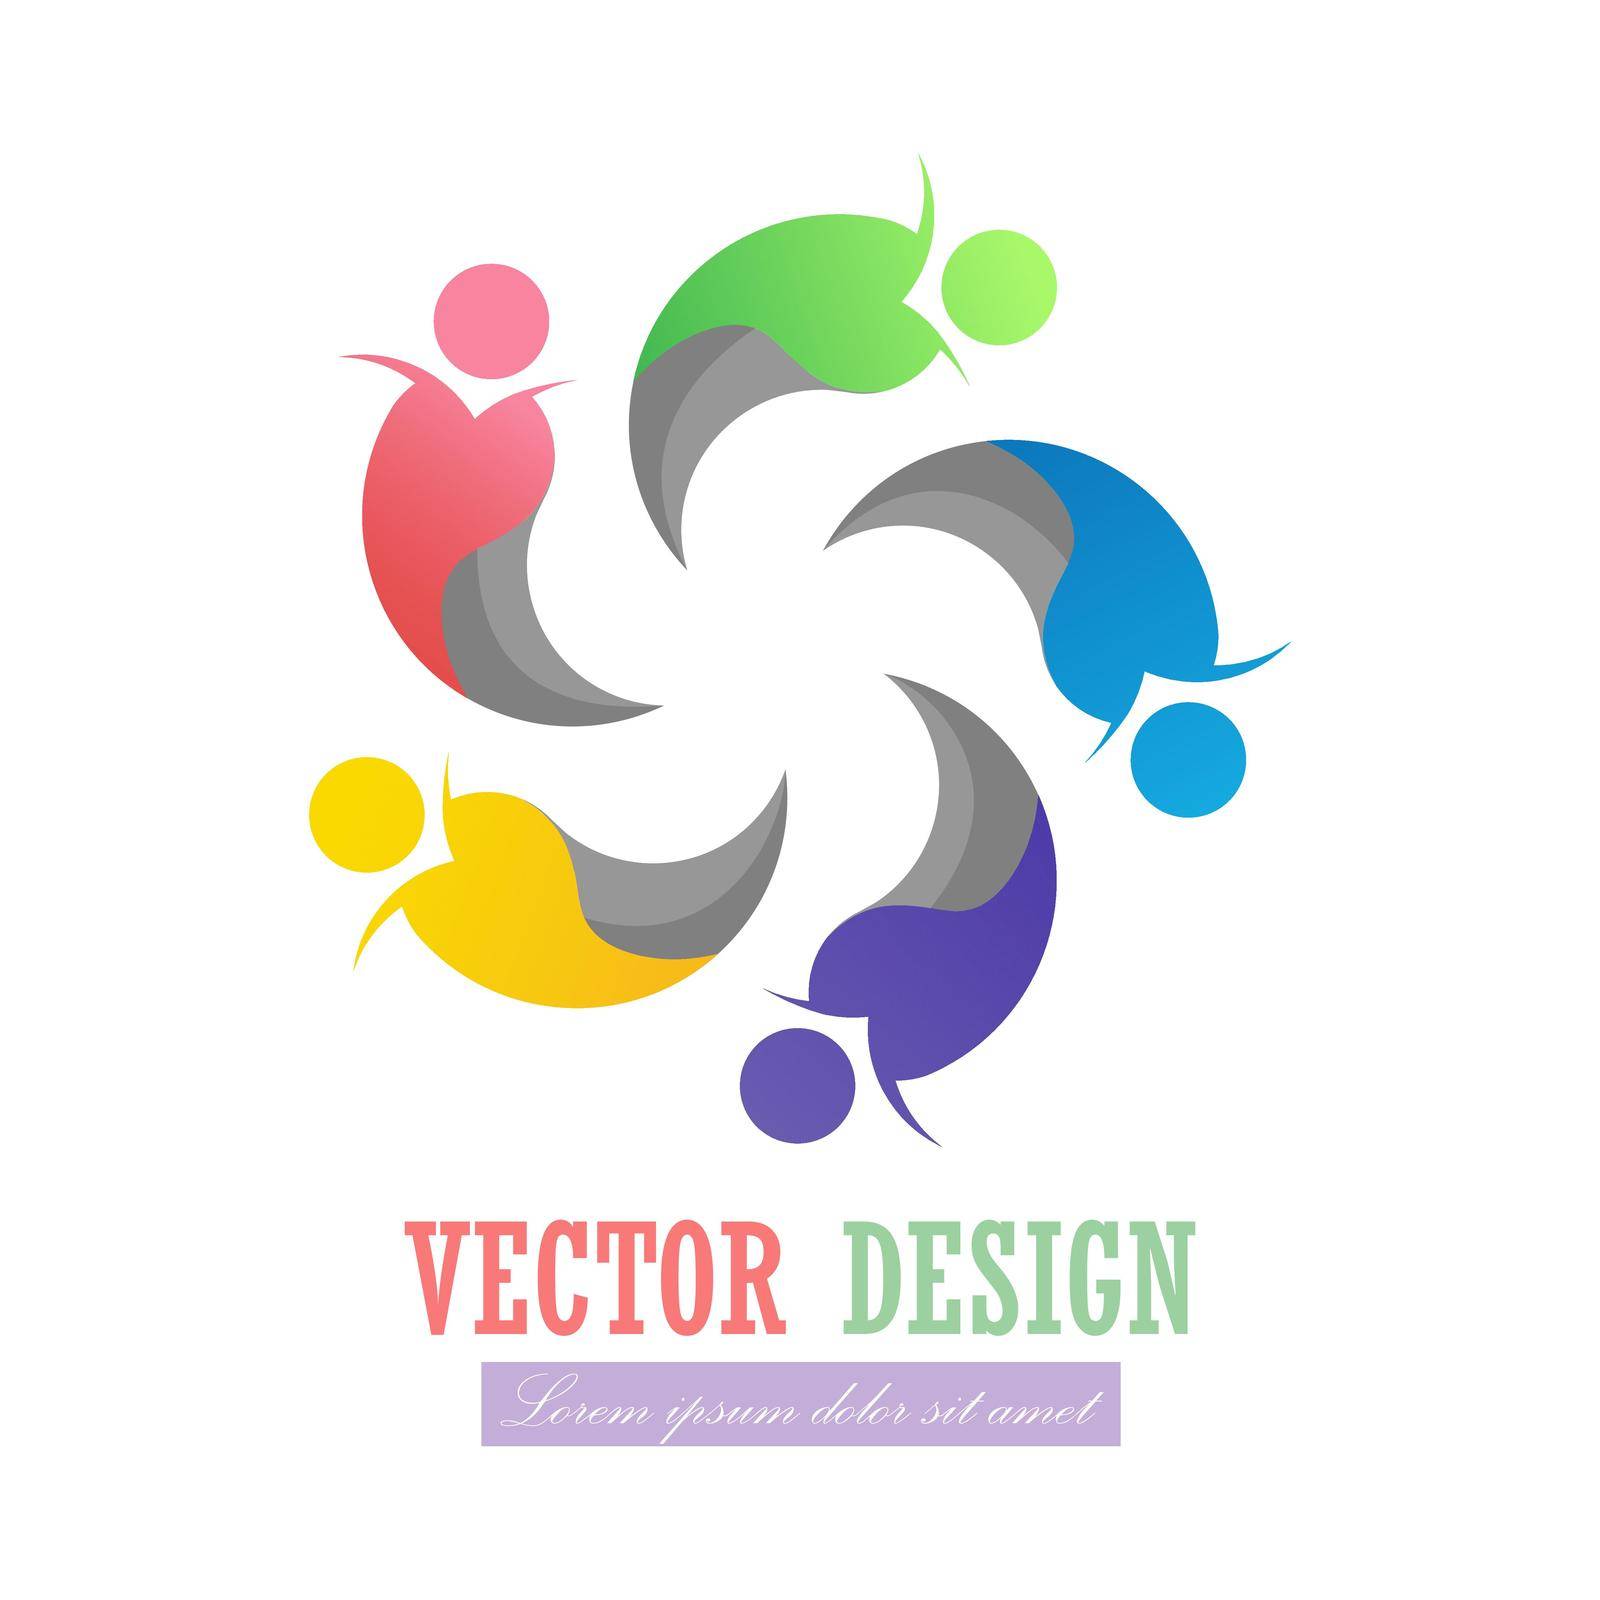 company's logo. Vector illustration for a logo, logo, brand or social project. Flat style